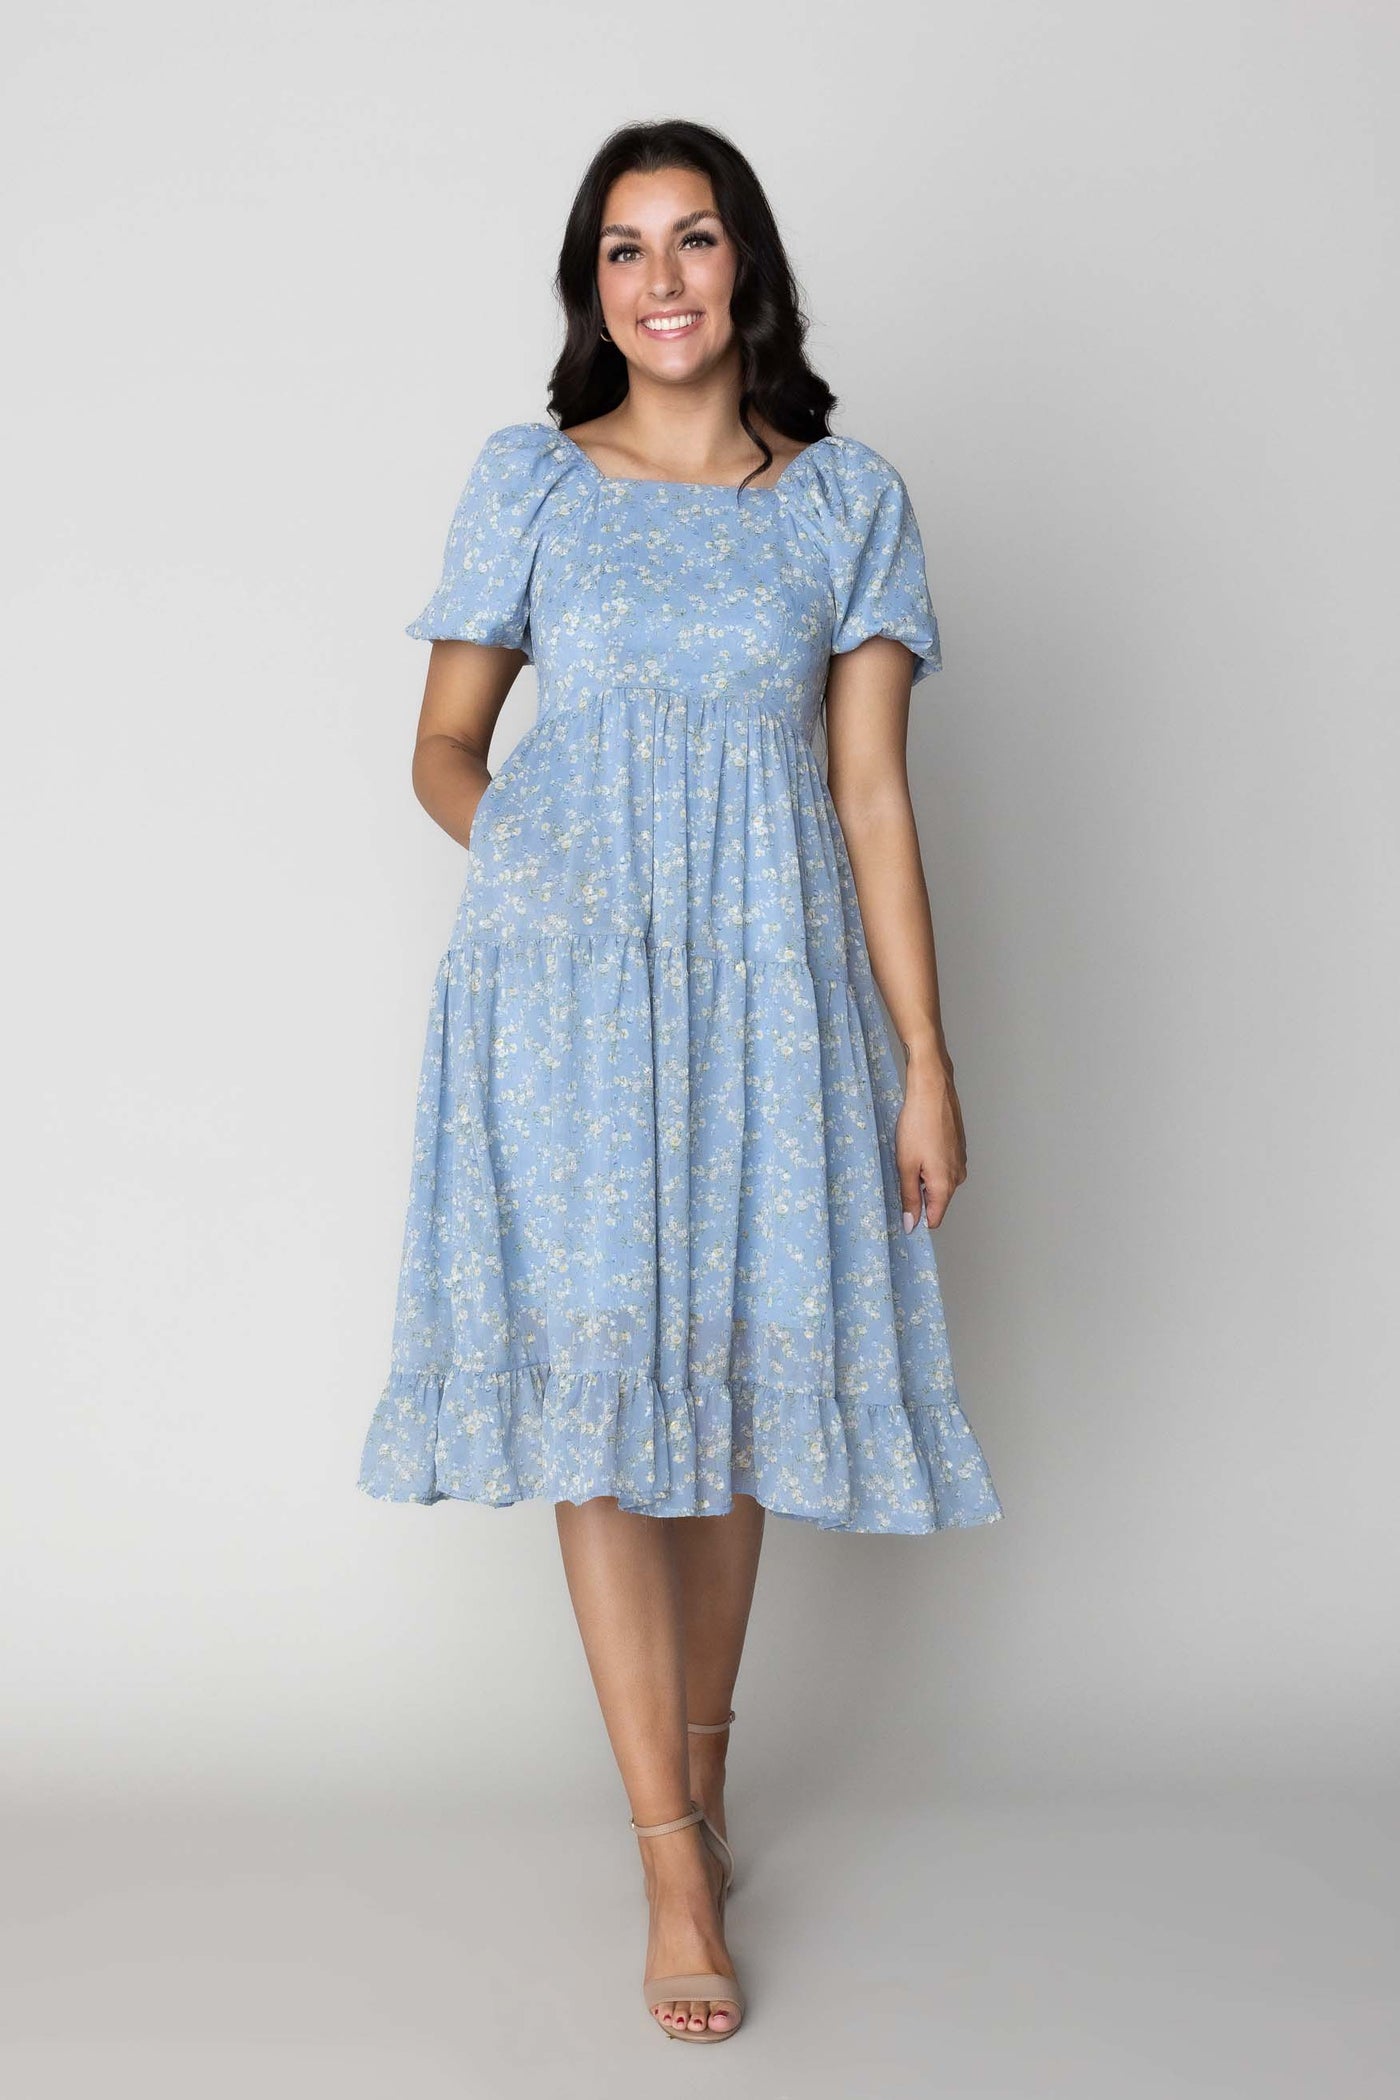 This is a modest dress with floral details and a fun bright blue color.